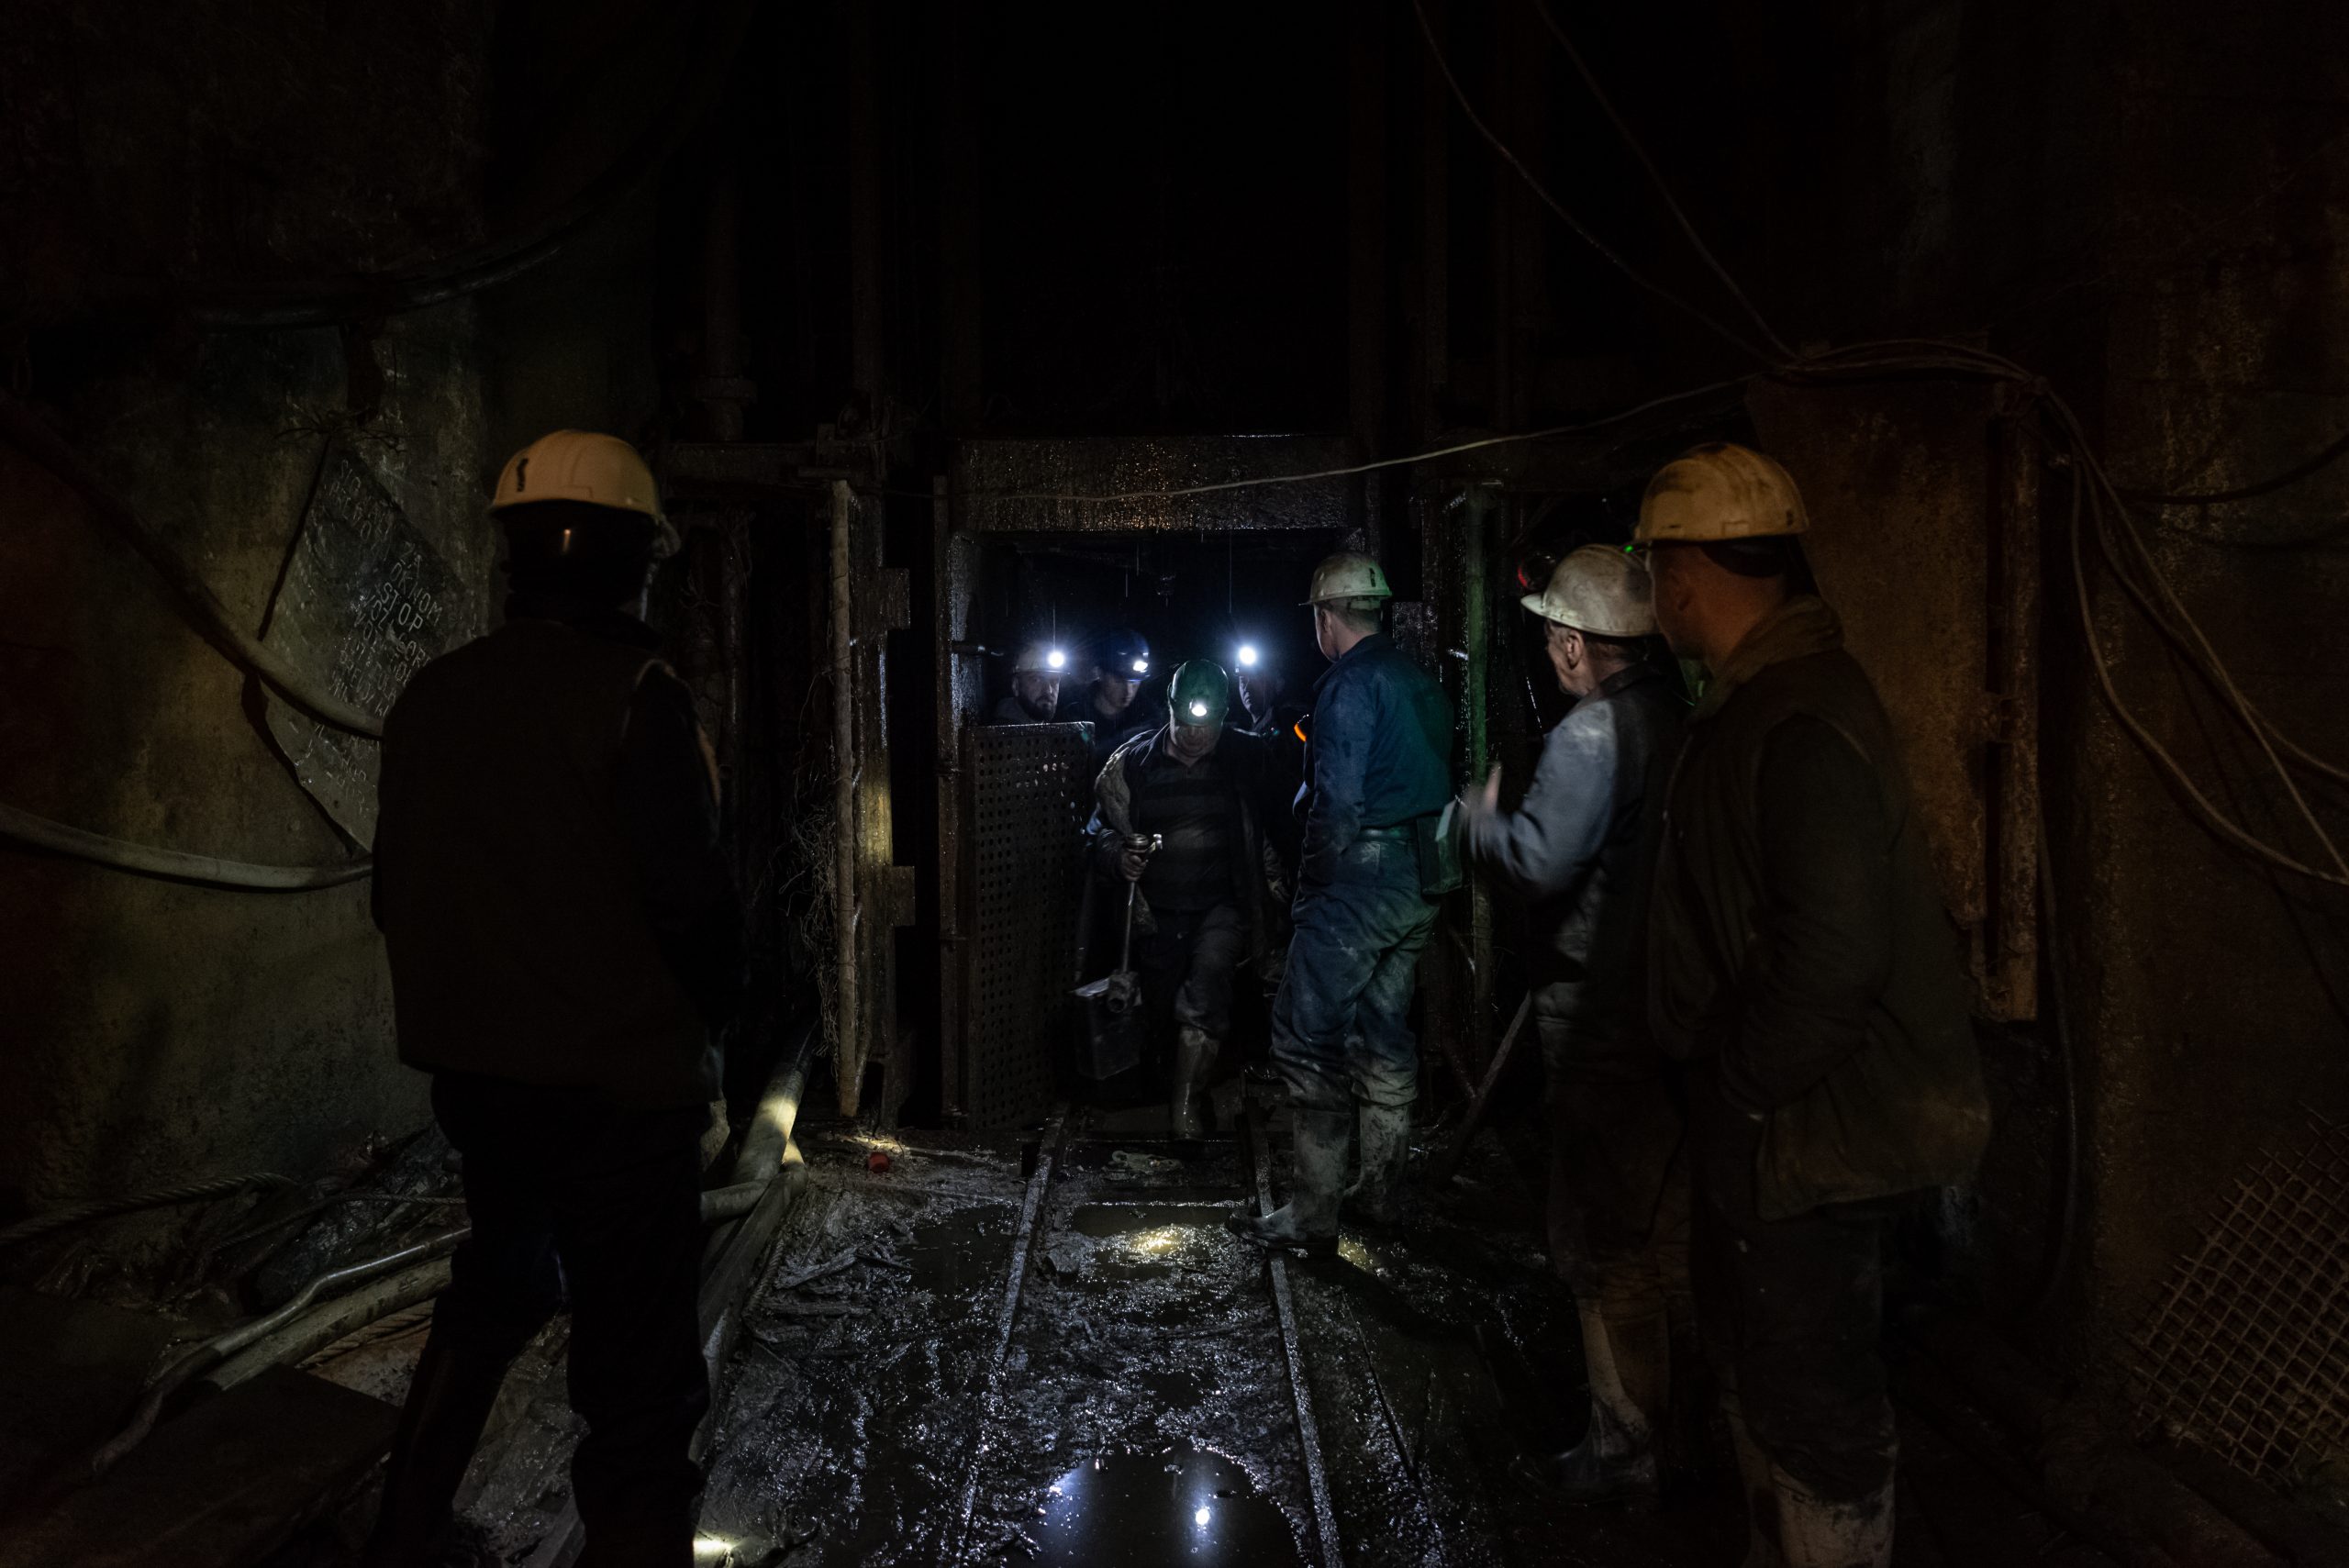 Miners at the end of a shift in the galleries at the Trepça mine site in Crnac.